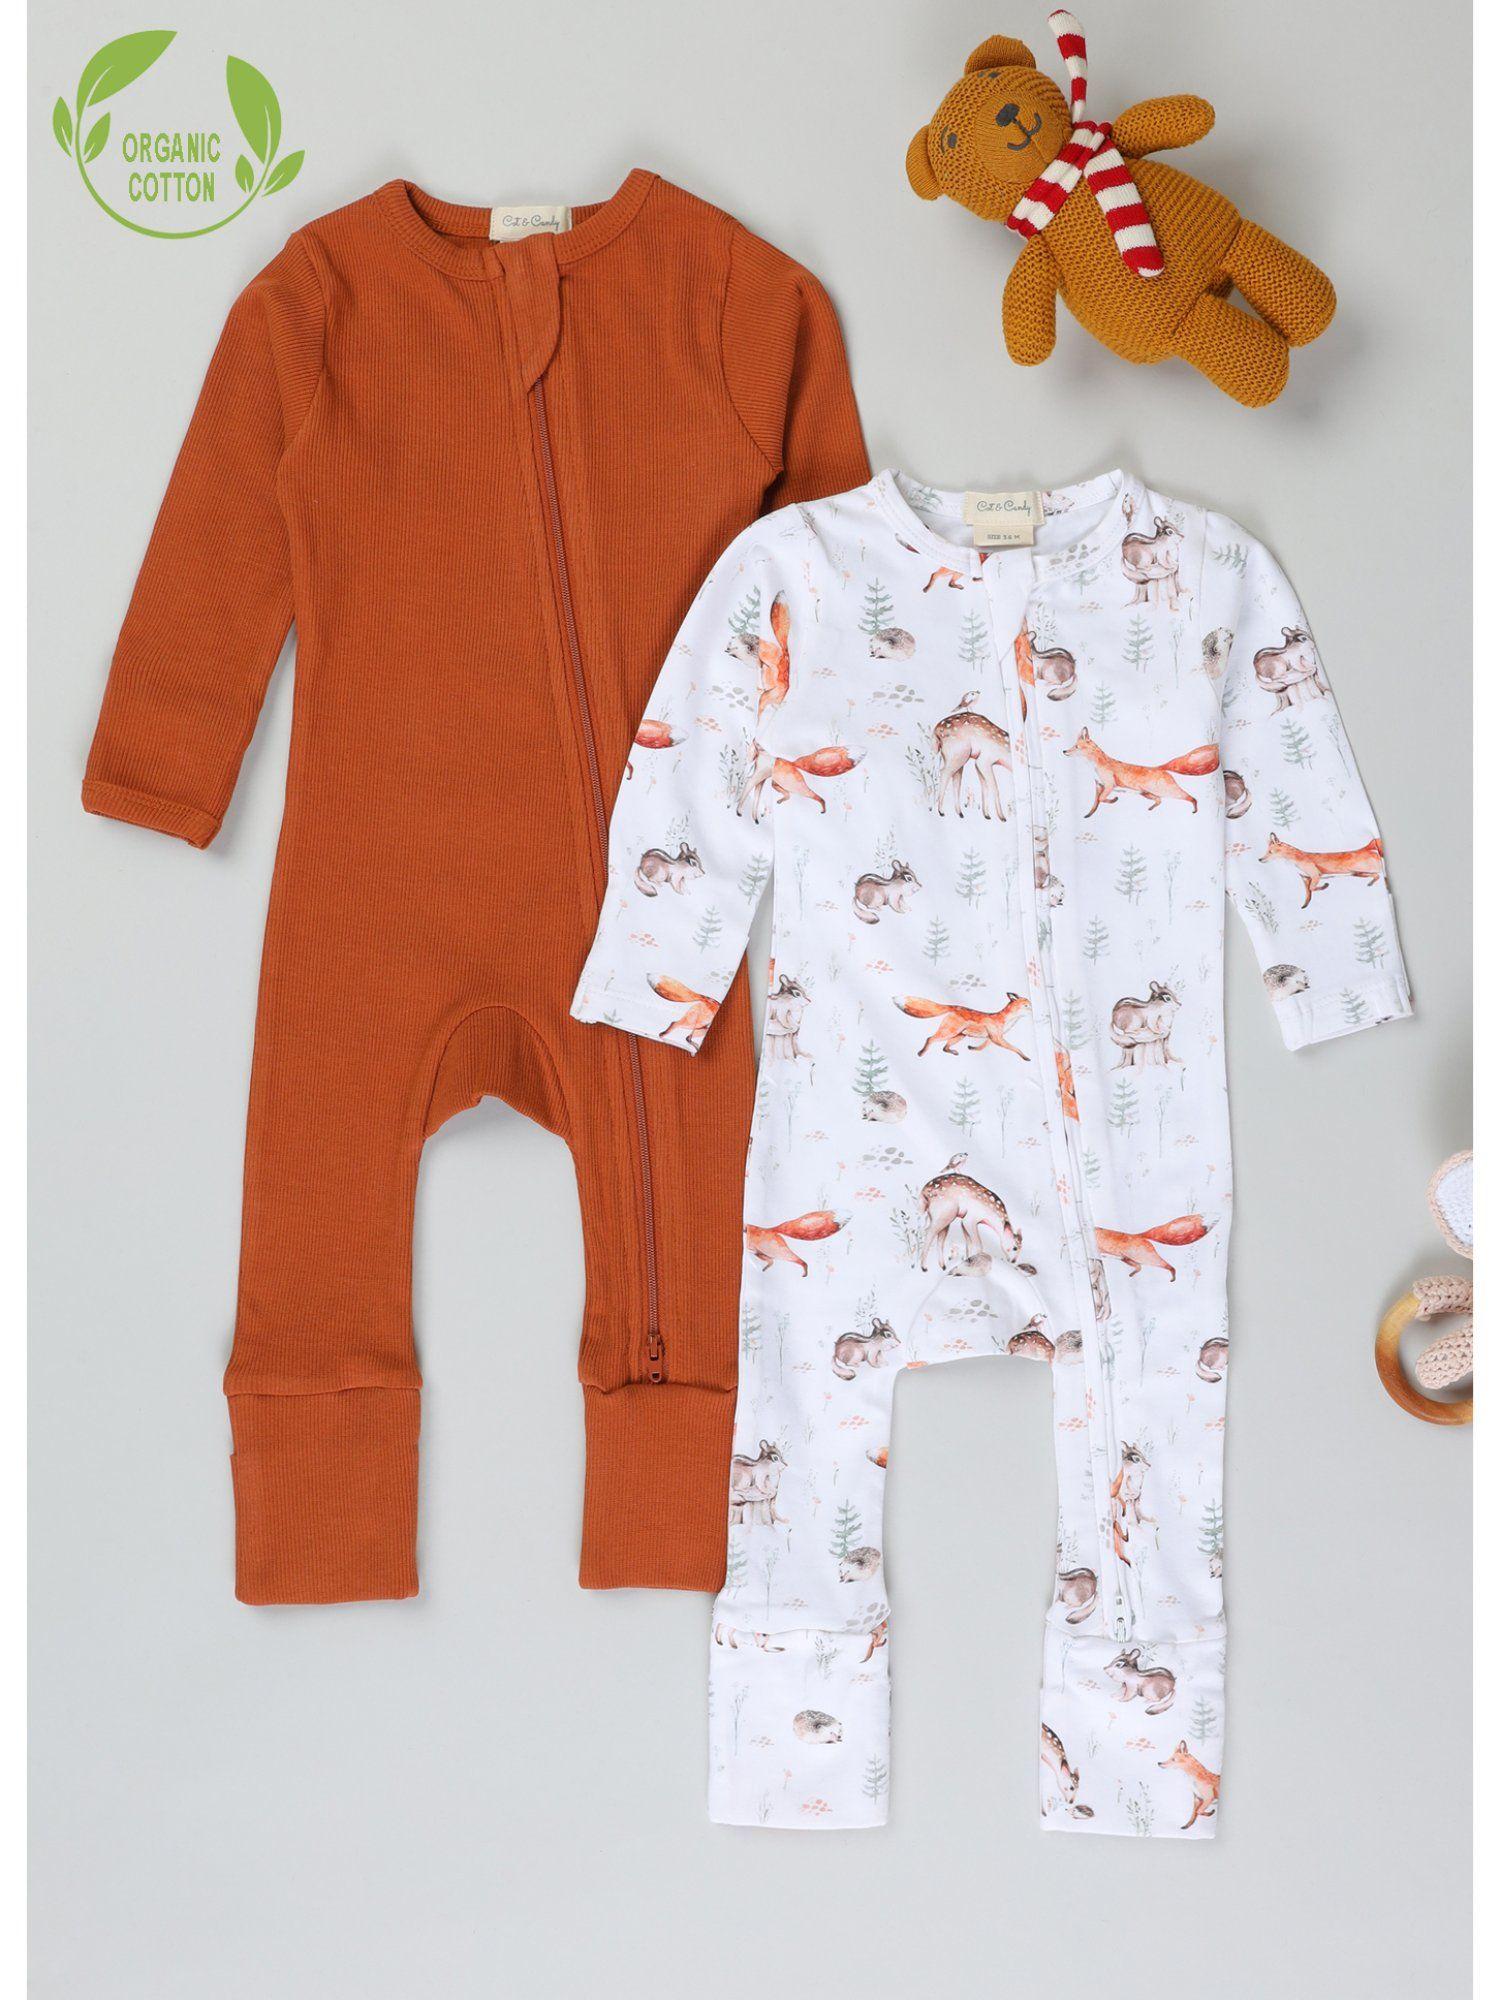 Full Sleeve Organic Cotton Kids Printed Zipsuit (Pack of 2)